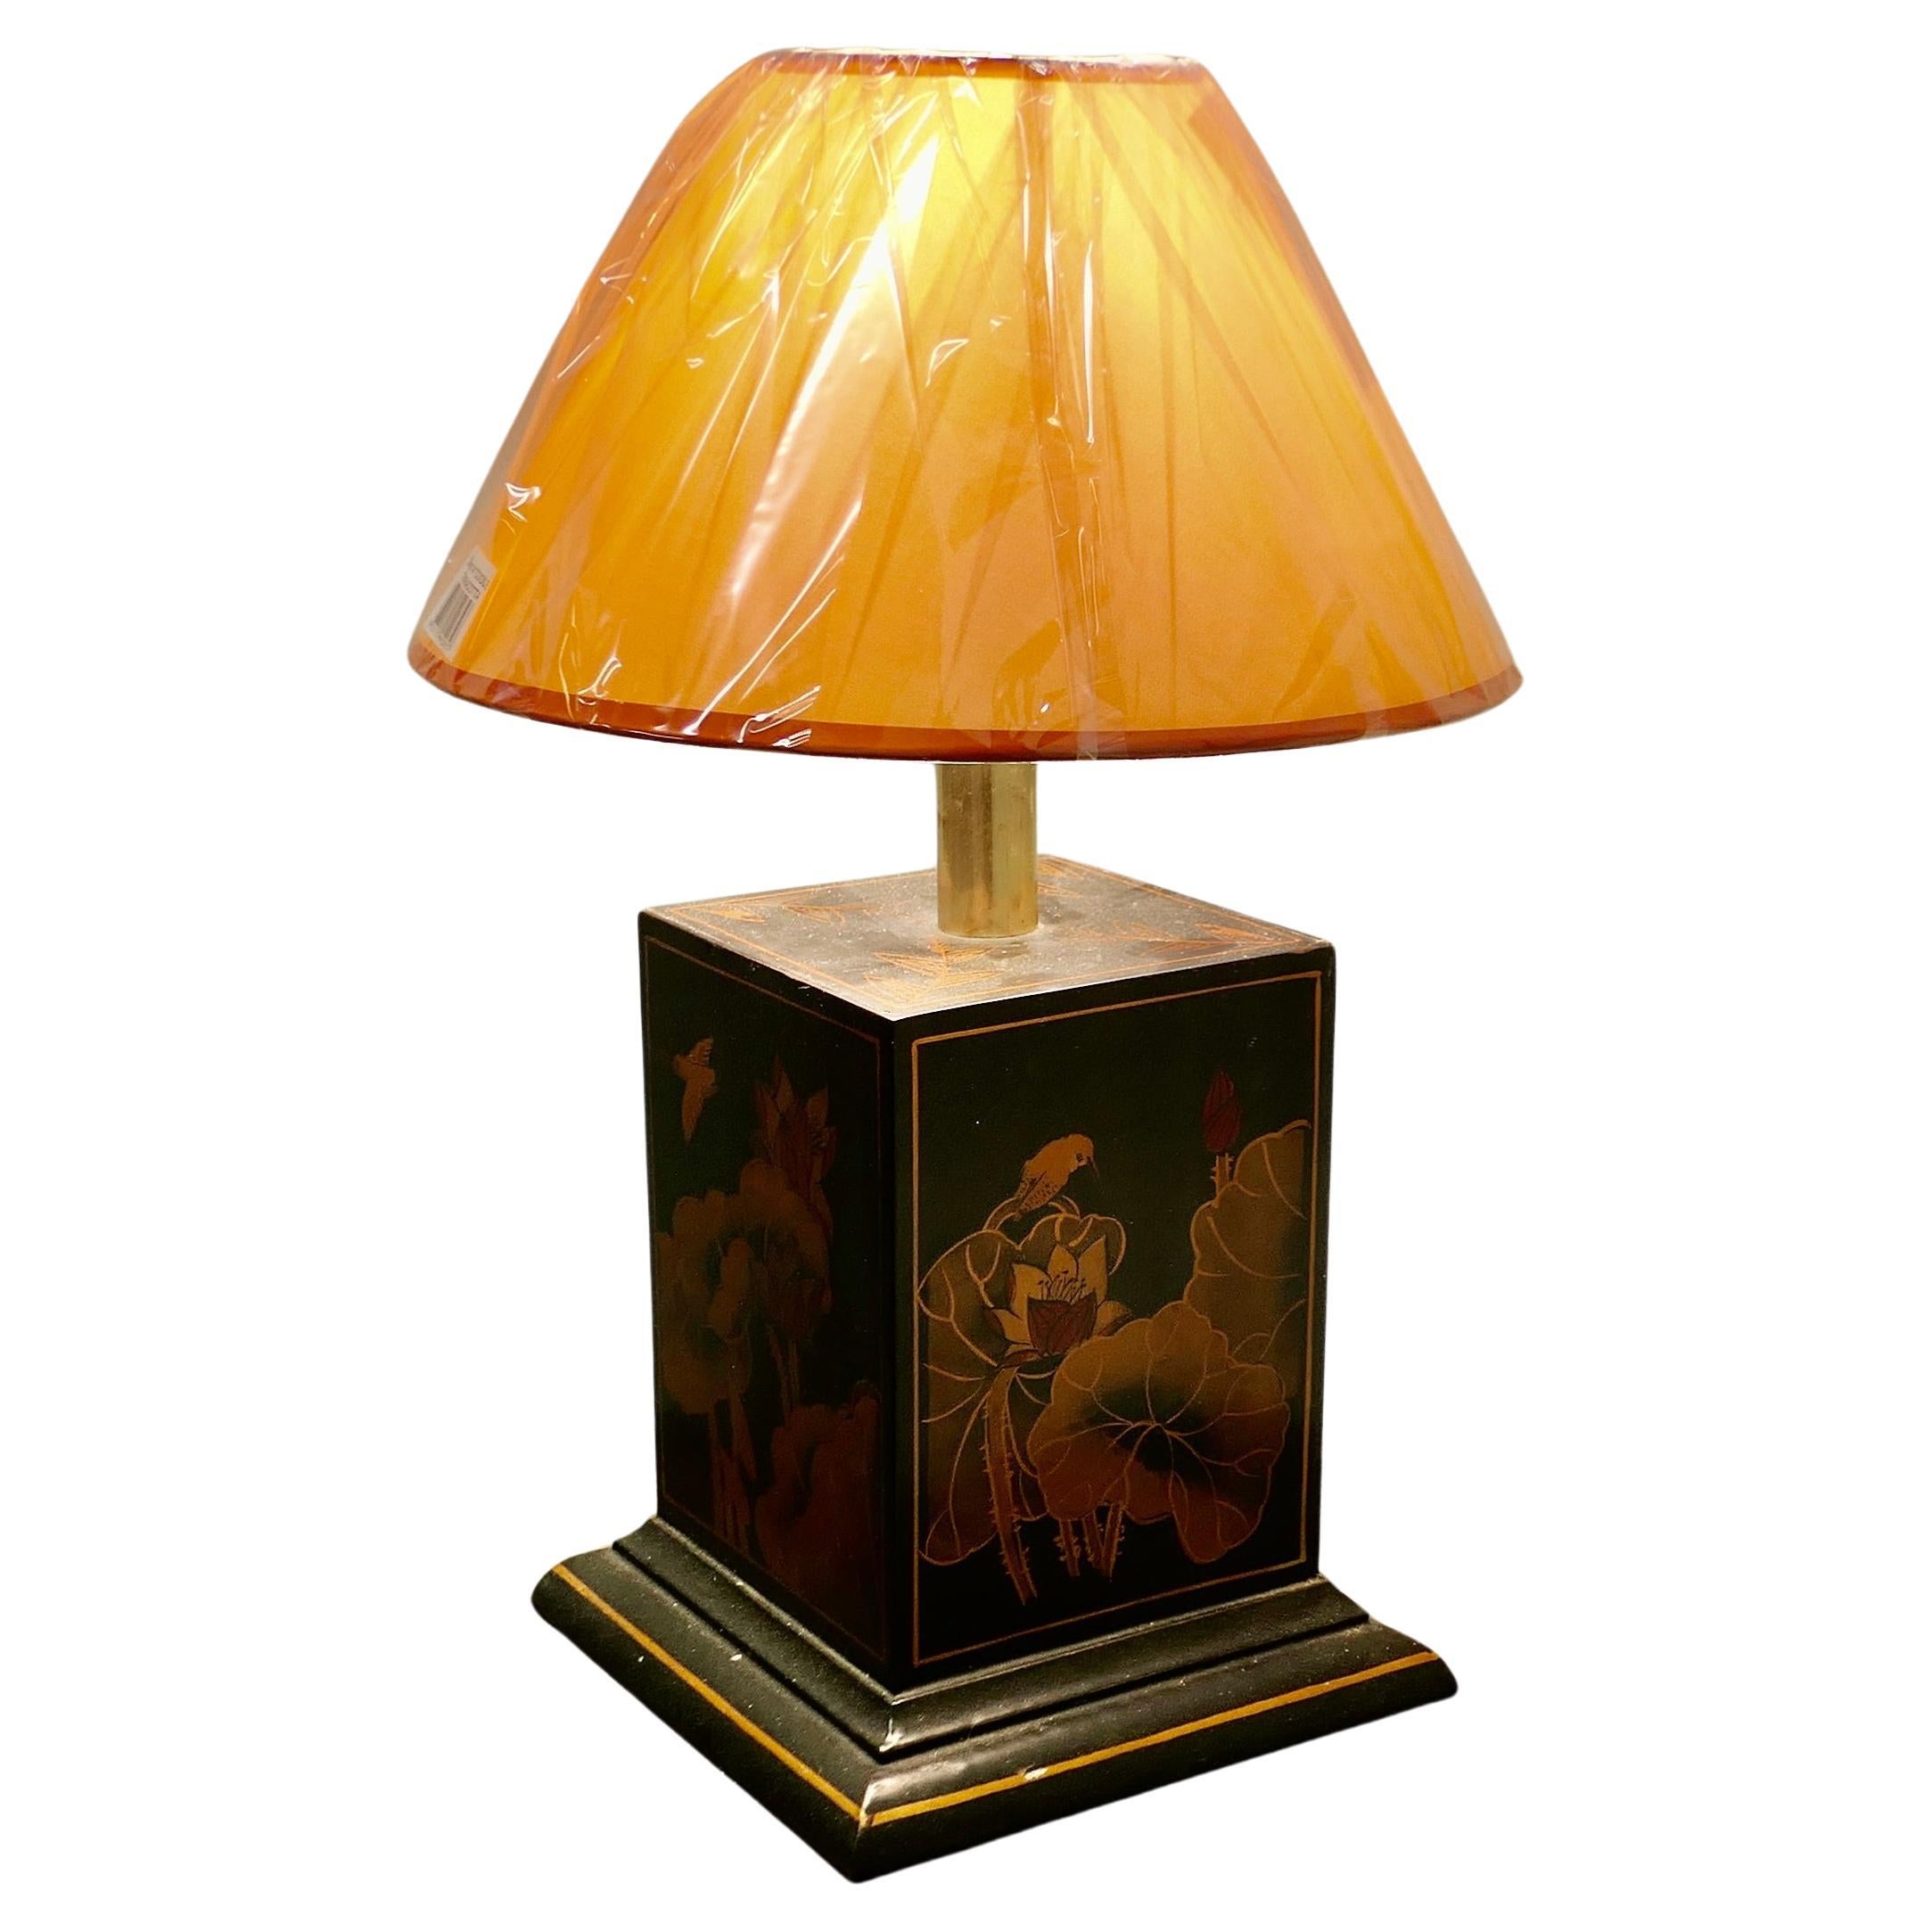 A Large Oriental Lacquer Cube Sideboard Lamp  The lamp is made in Wood and Brass